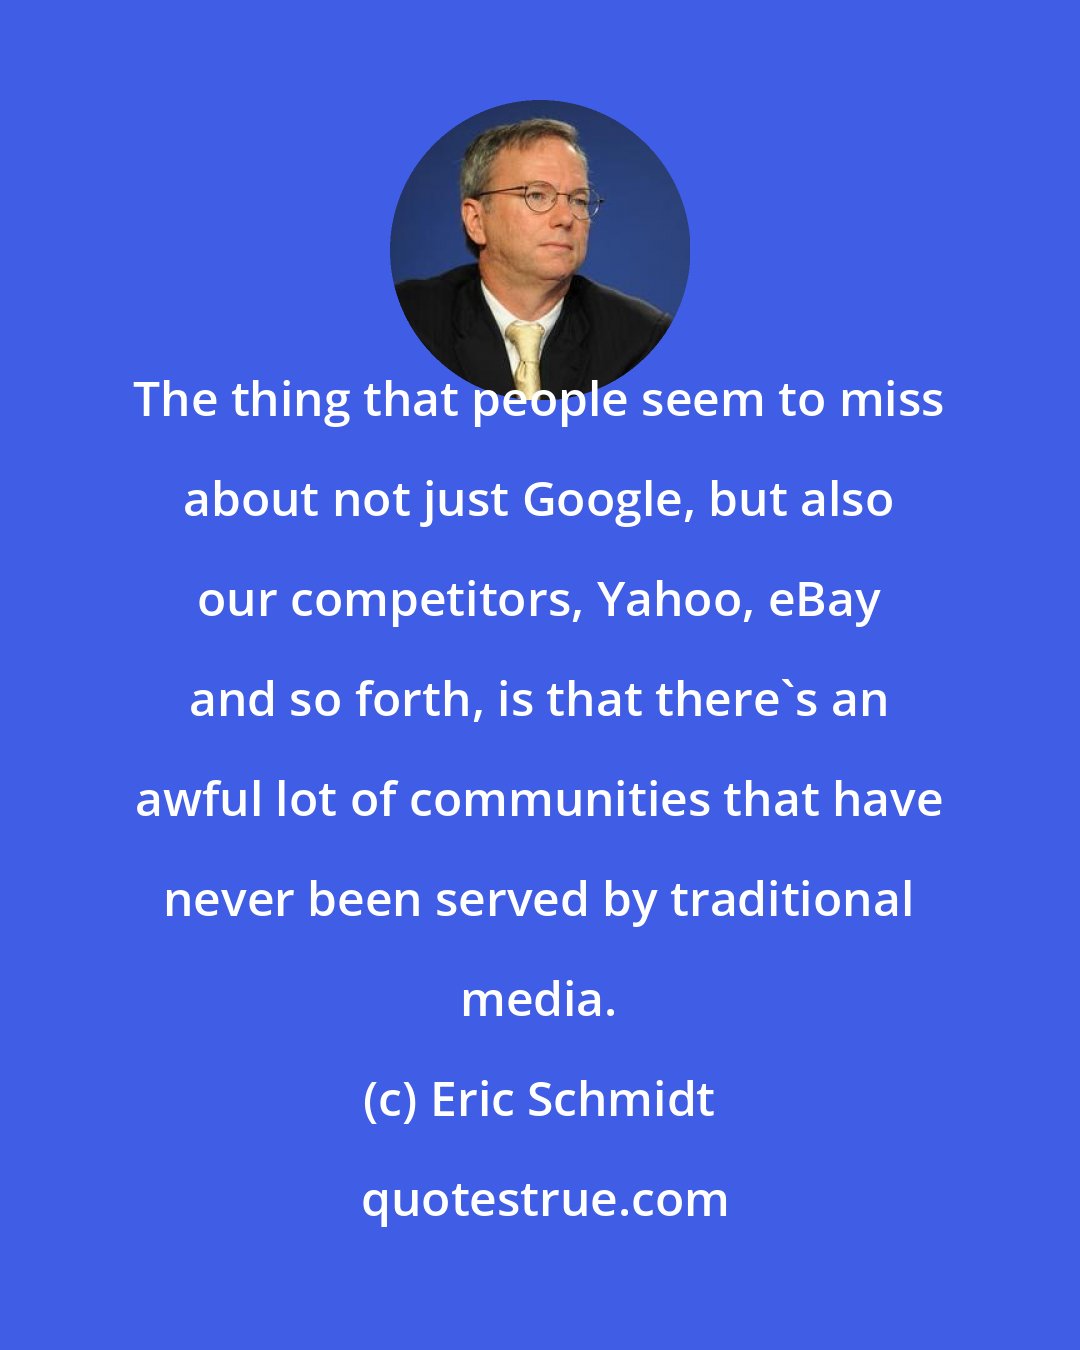 Eric Schmidt: The thing that people seem to miss about not just Google, but also our competitors, Yahoo, eBay and so forth, is that there's an awful lot of communities that have never been served by traditional media.